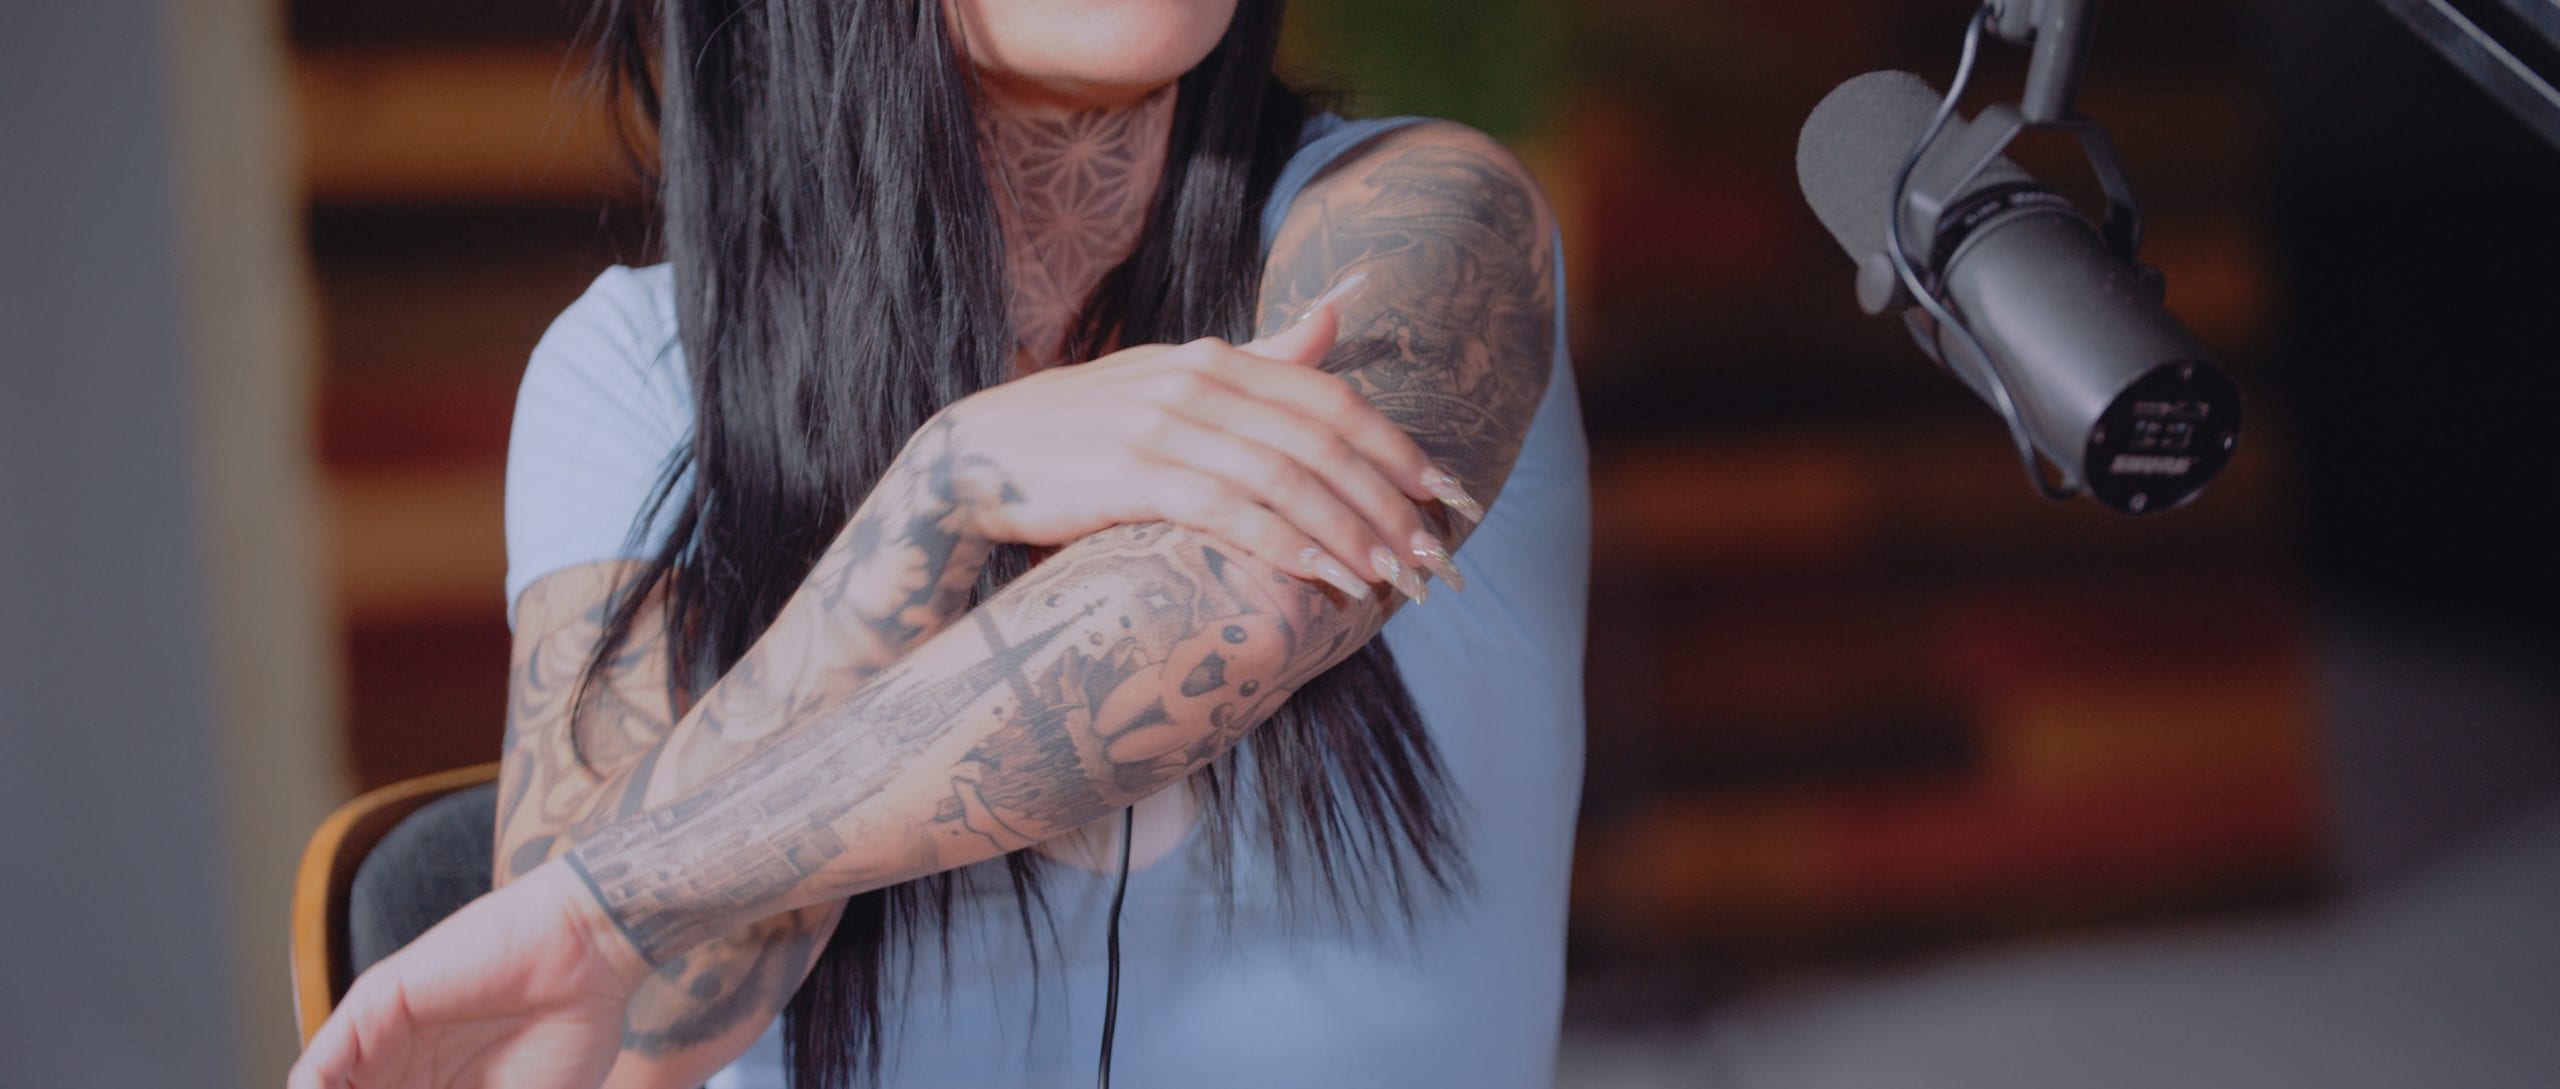 Uncreative Radio with Jaquelyn Puma with closeup of her tattooed arms by a microphone